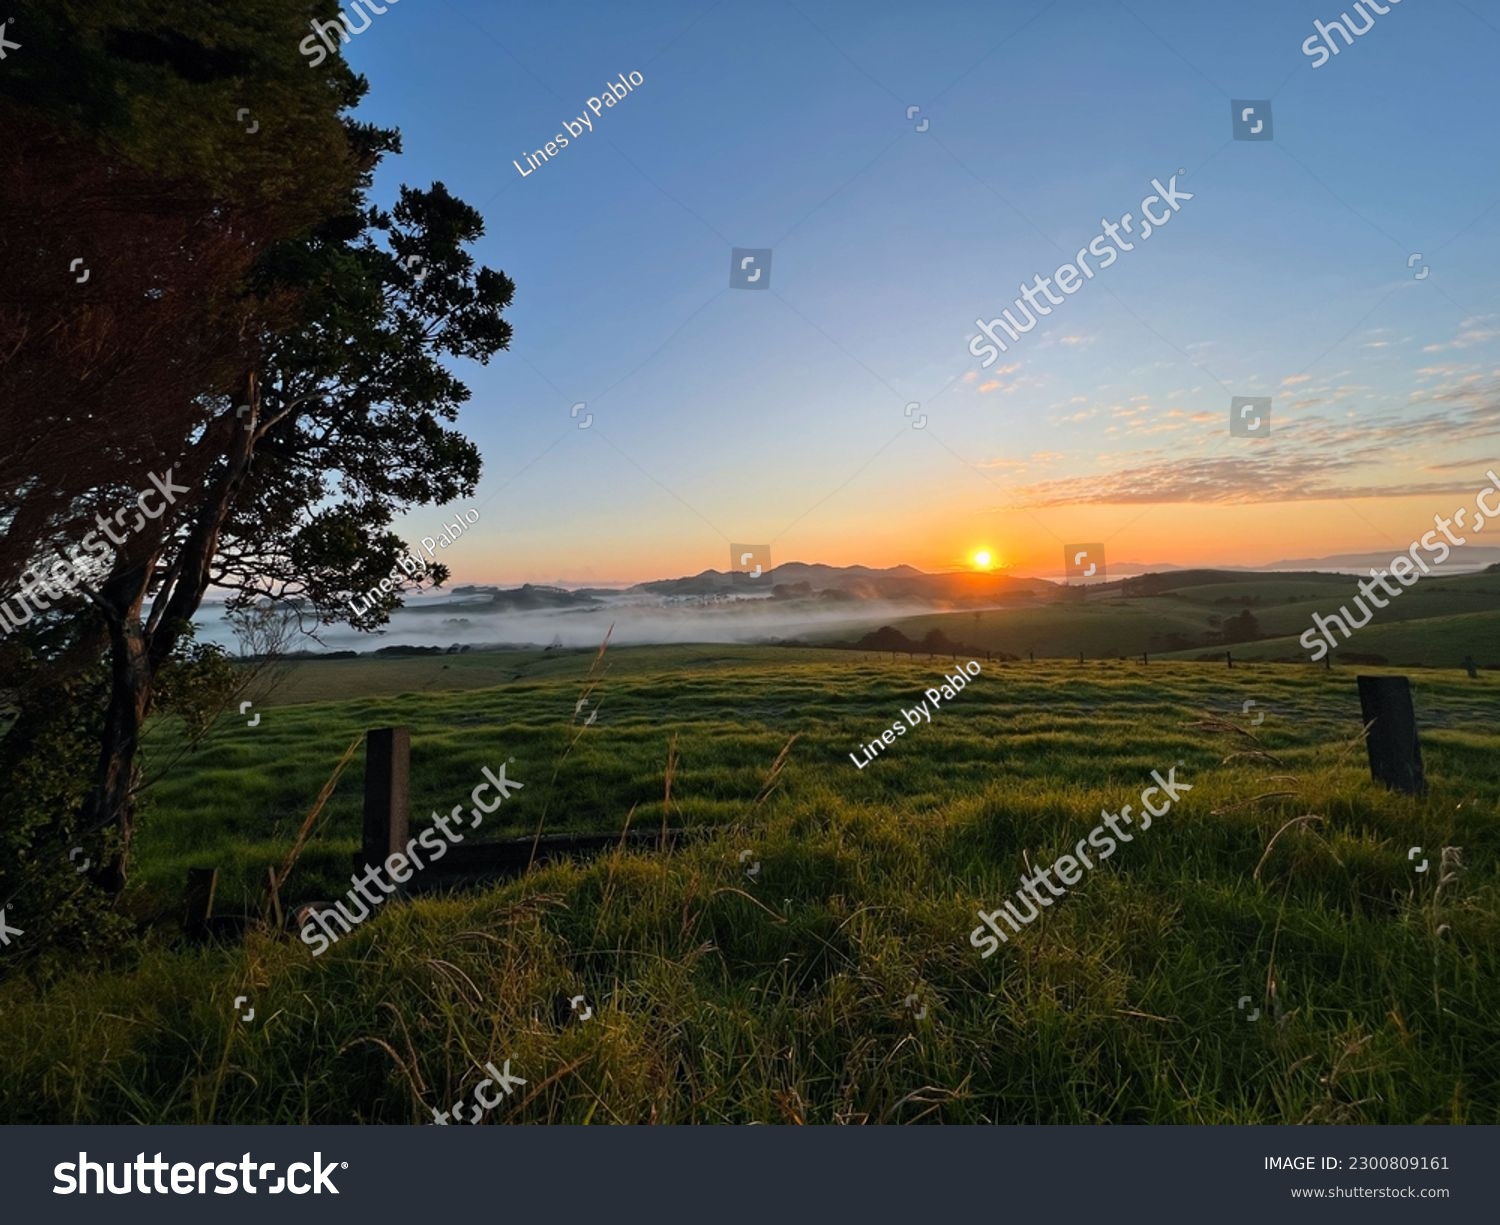 A serene rural scene in Bay of Islands, NZ. Lush green landscape with low fog. Rustic charm and simple agricultural life showcased in golden morning light. #2300809161